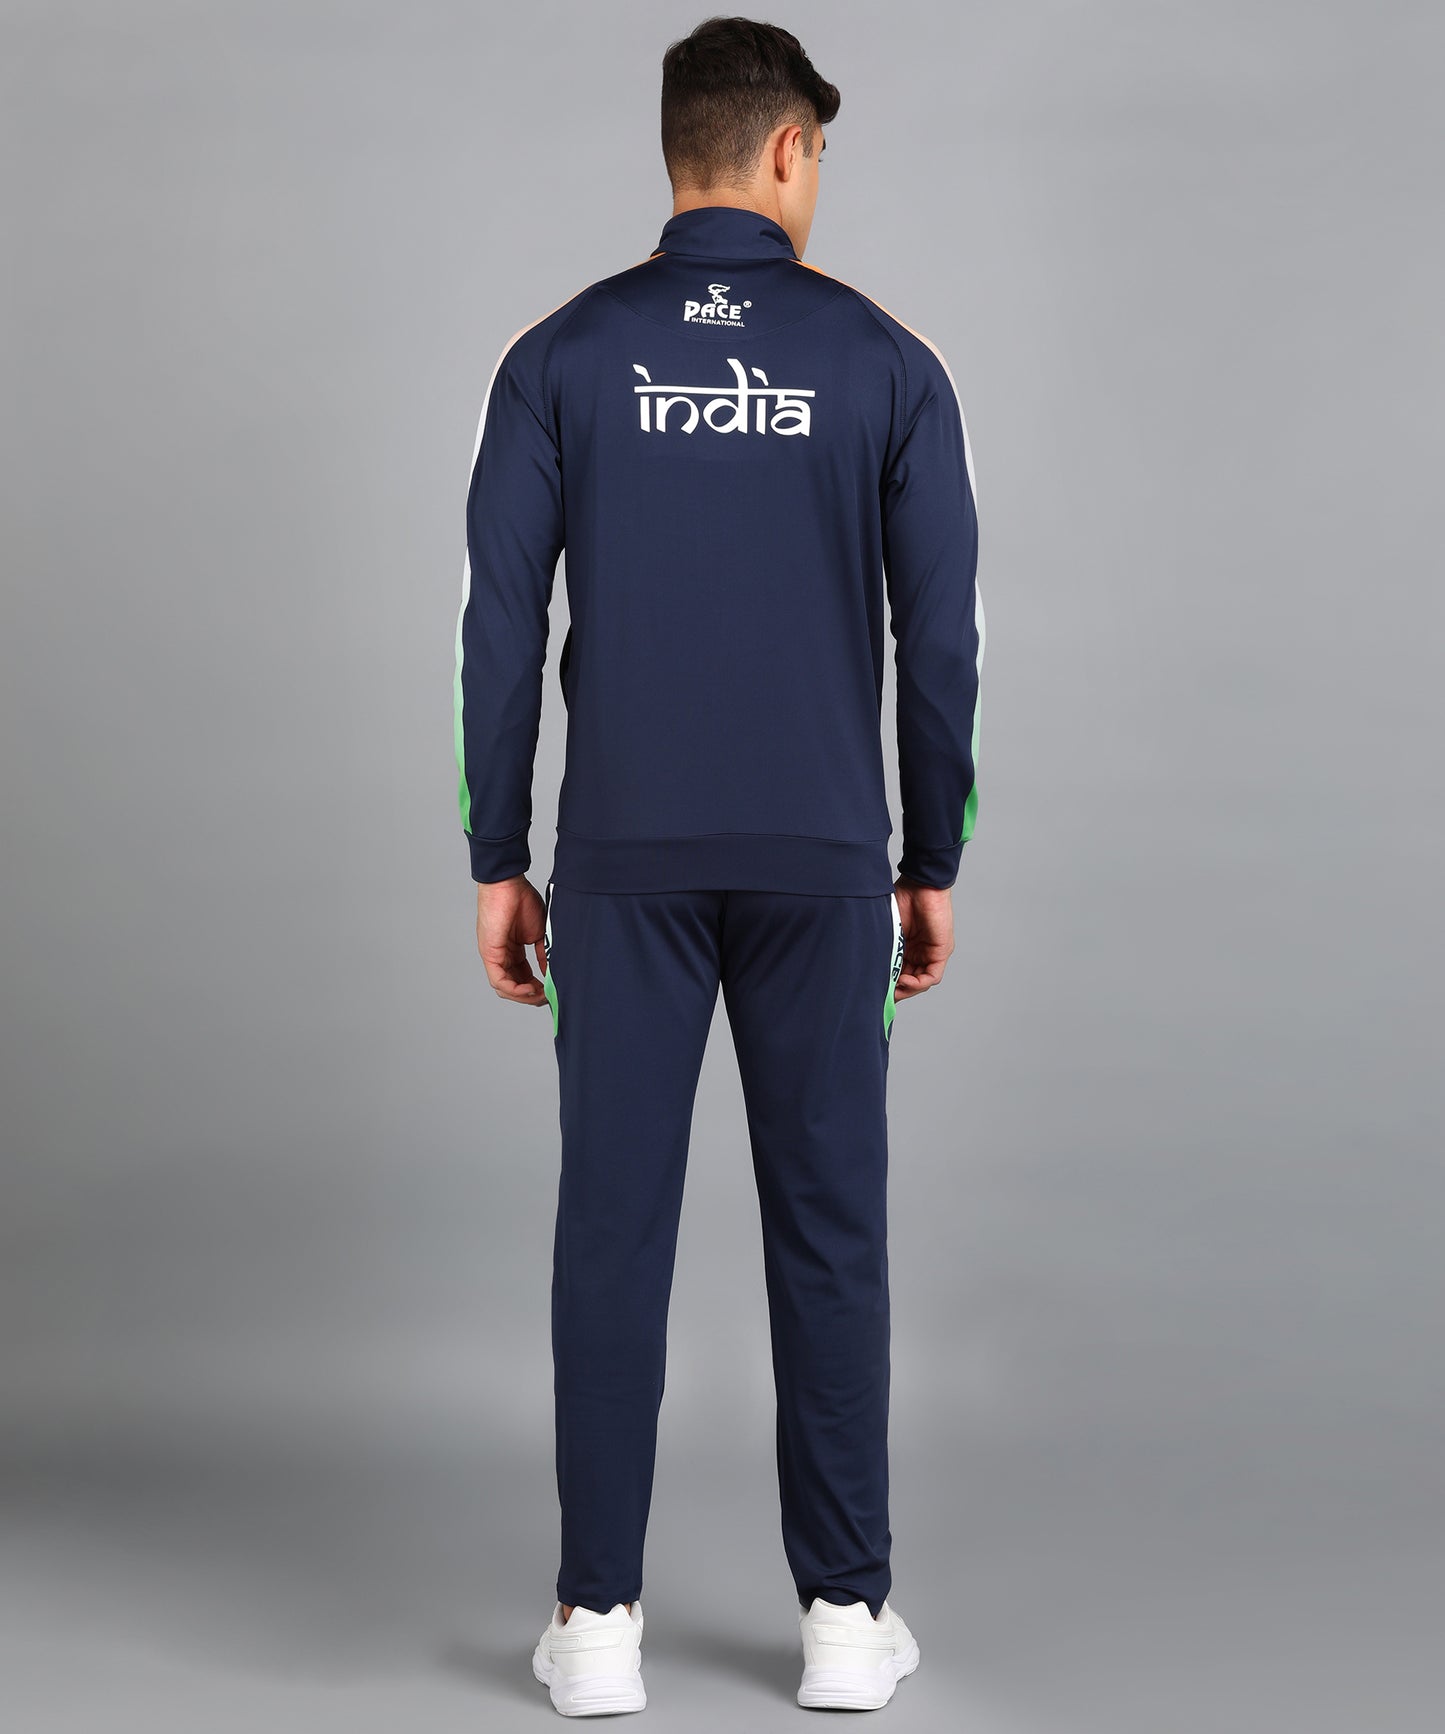 Pace International Printed Stretchable Men Track Suit